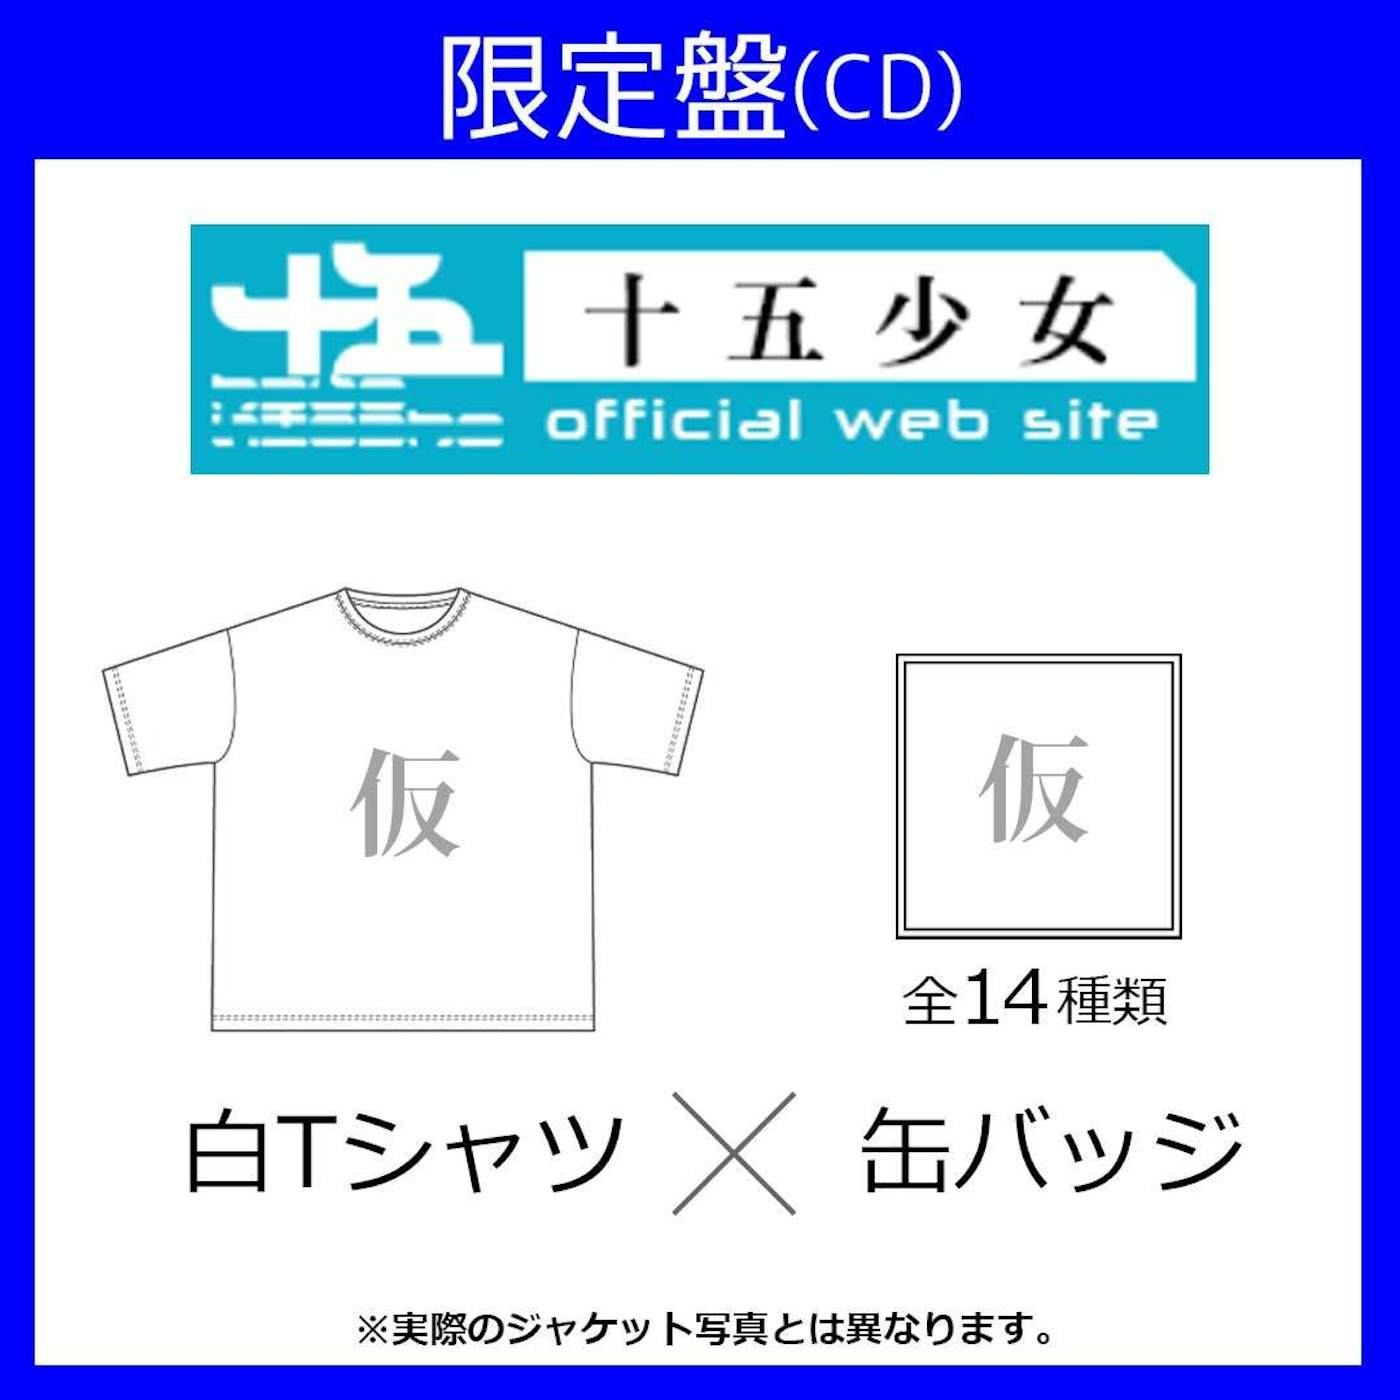 Fifteen voices ≪限定セット：缶バッジ×白Tシャツ(L)≫SILENTHATED(2枚組AL+スマプラ)